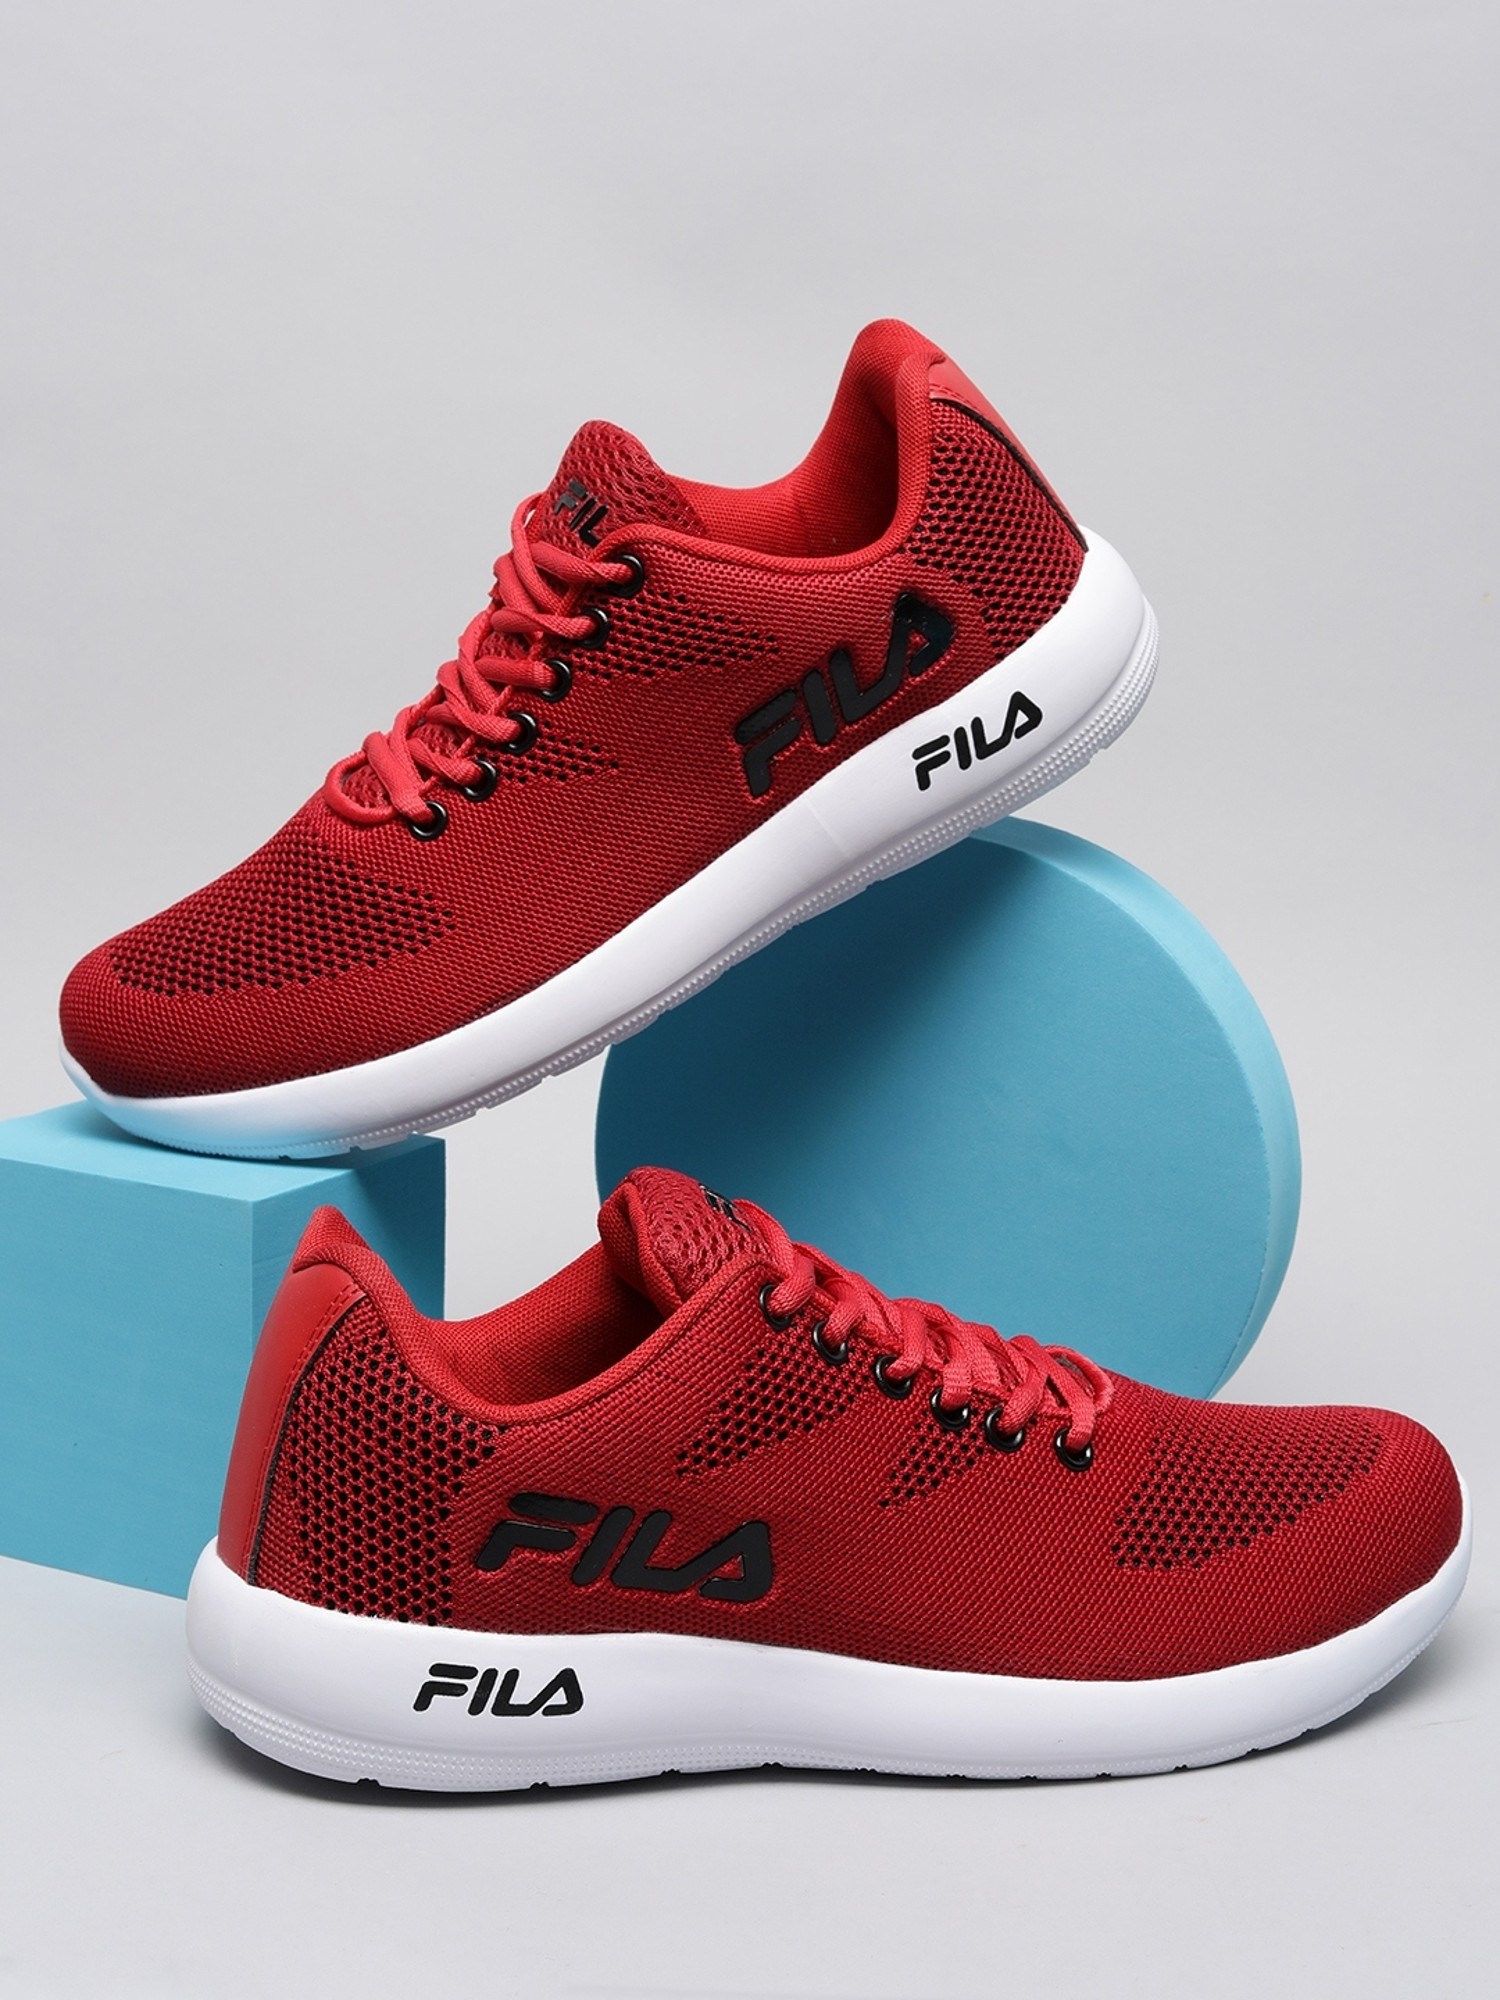 Betinget Bliv sur volleyball Buy Fila Men's LOREM Red Running Shoes for Men at Best Price @ Tata CLiQ